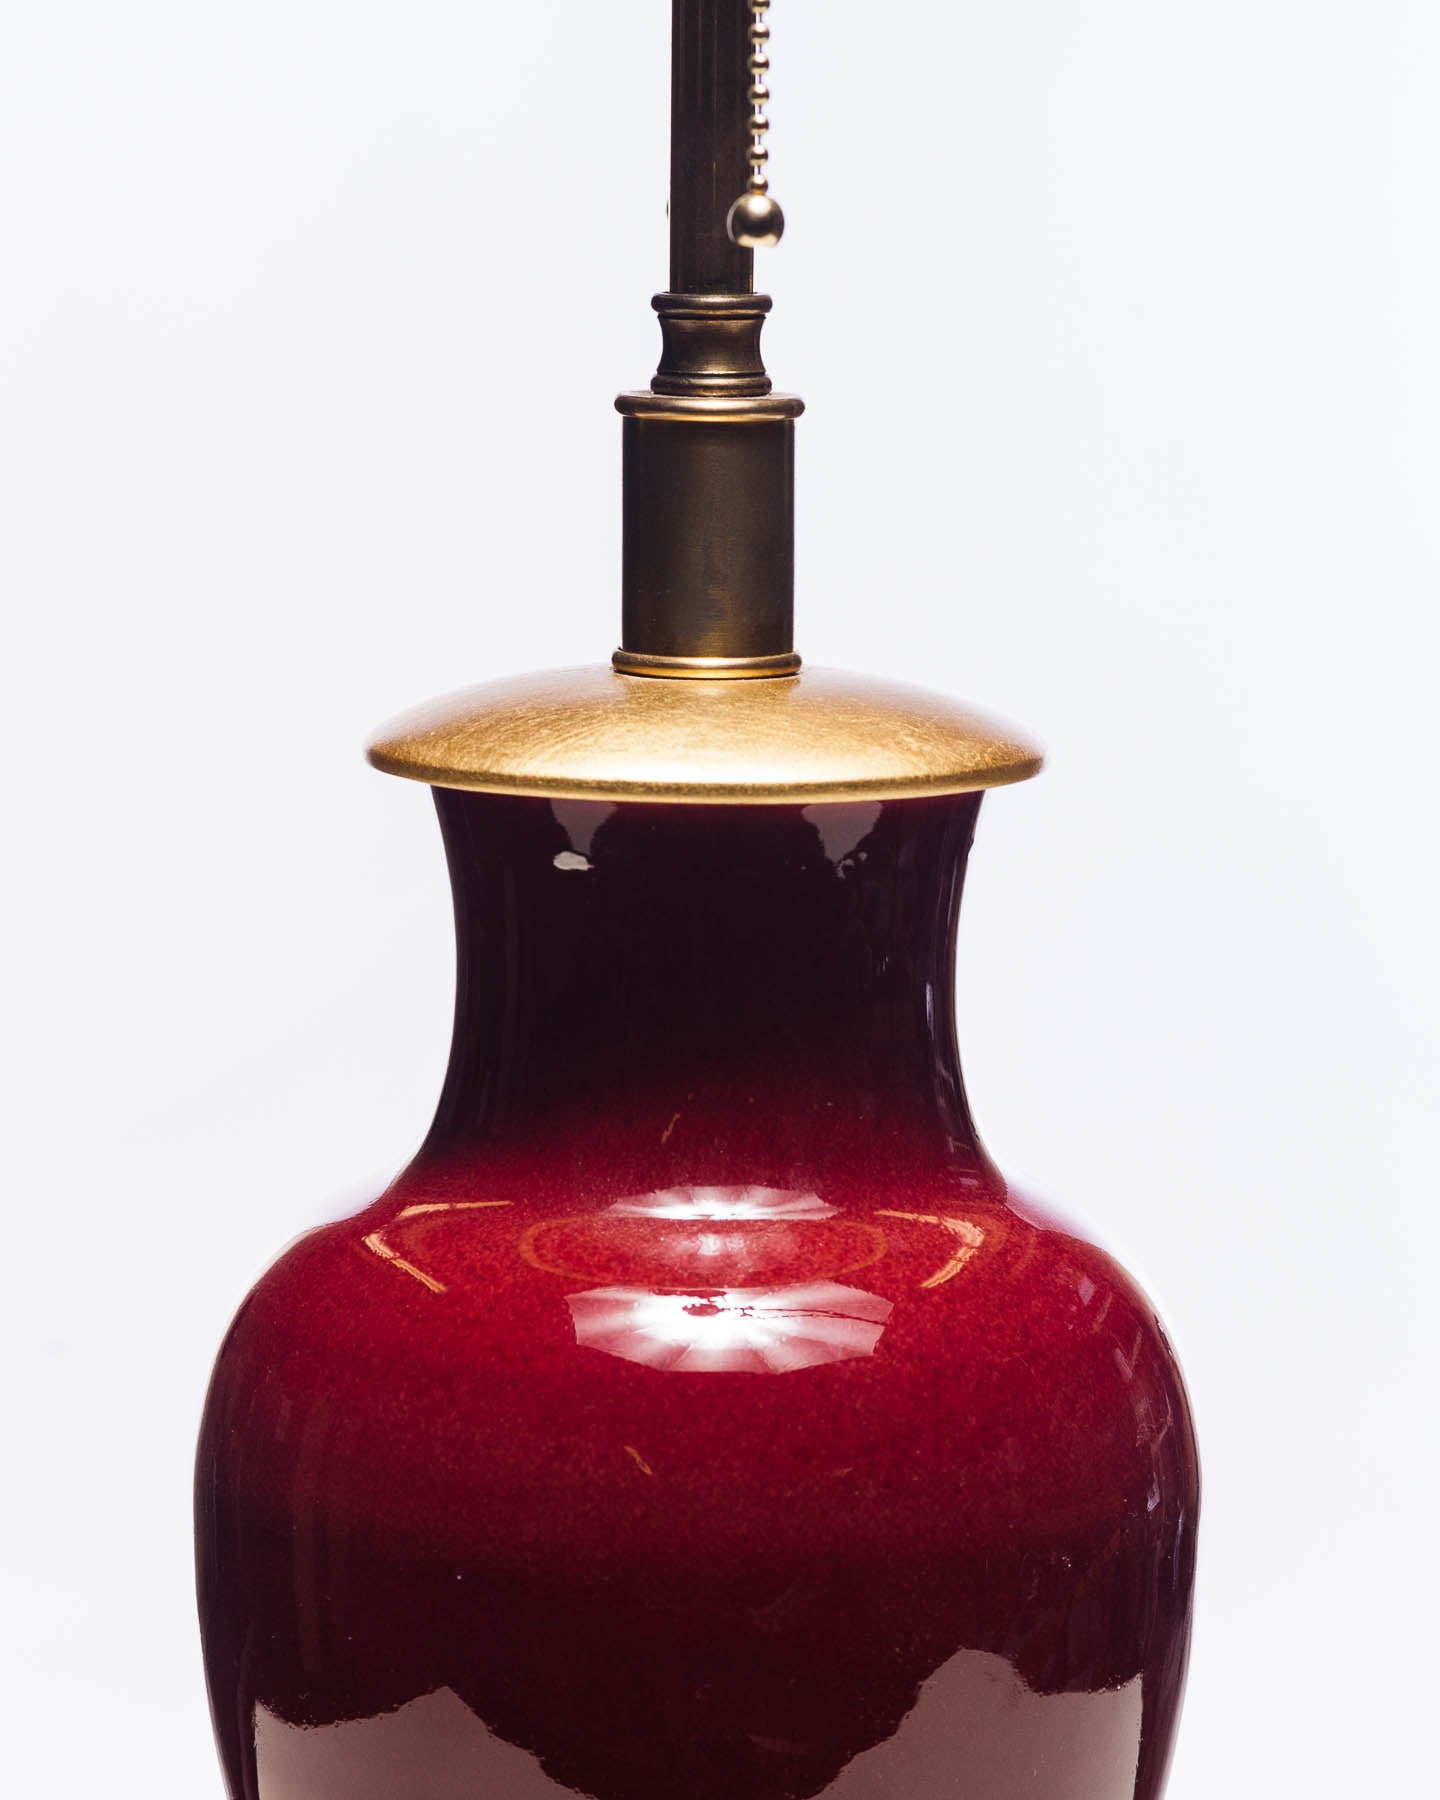 Legacy Gabrielle Baluster Porcelain Lamp in Oxblood with Gilded Gold Base